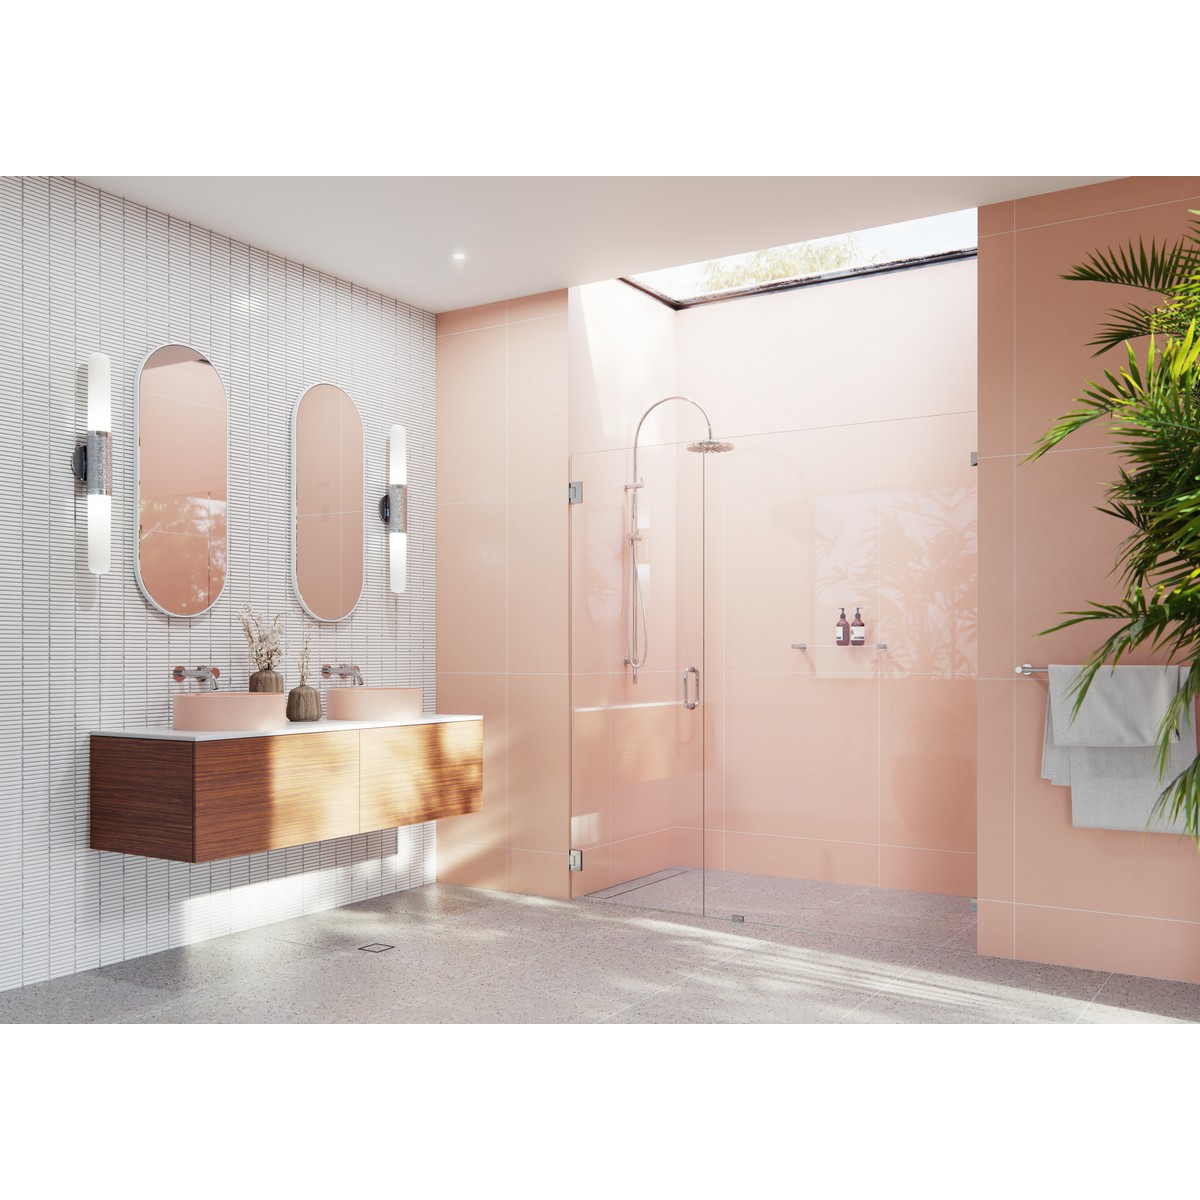 GLASS WAREHOUSE GW-WH-75.25 ILLUME 75 1/4 W X 78 H WALL HINGED FULLY FRAMELESS GLASS SHOWER ENCLOSURE